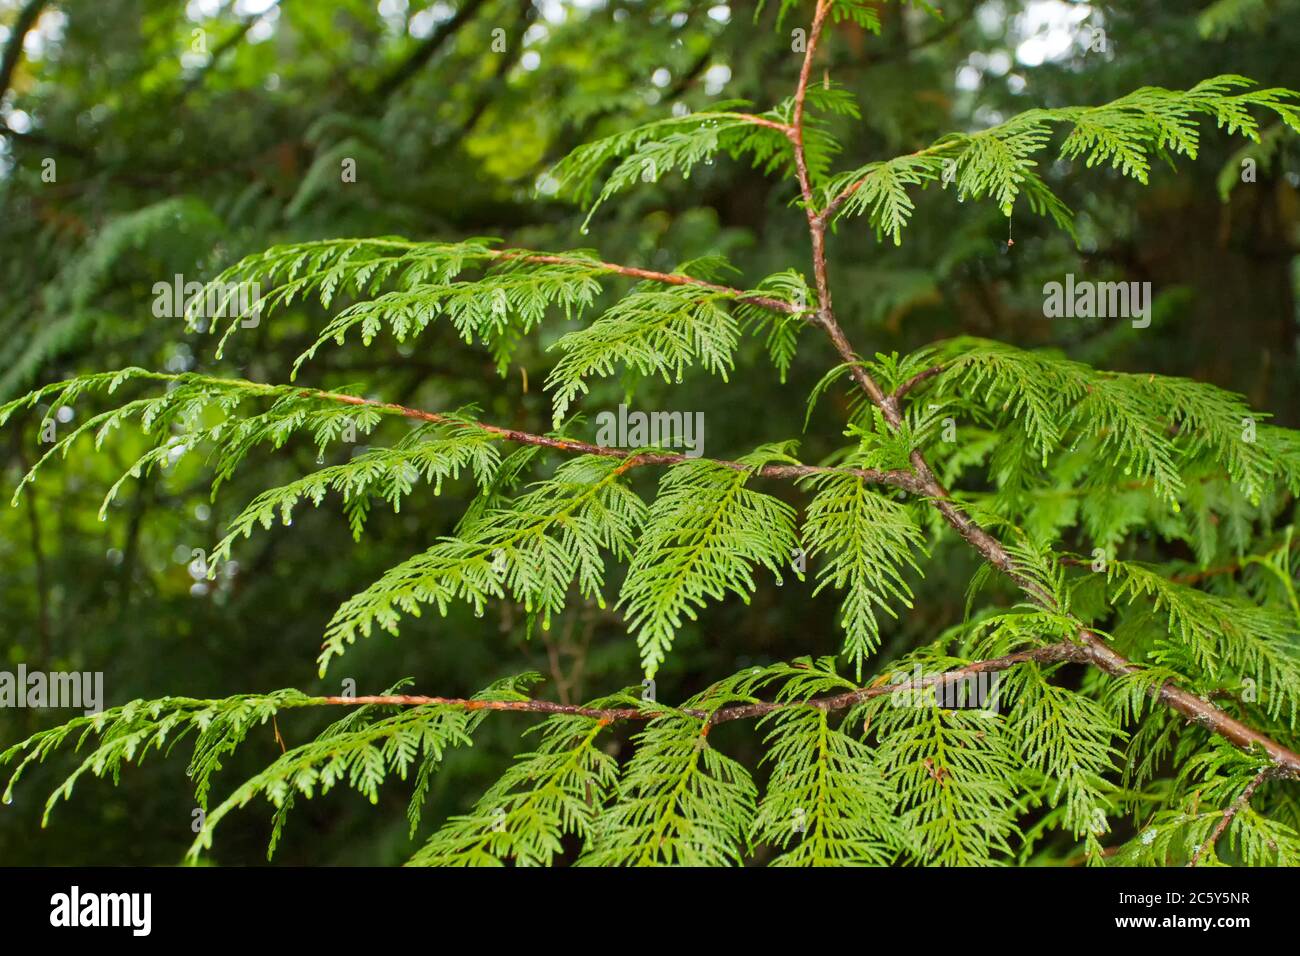 Western Red Cedar branchlet (withe) and its characteristic scale-like leaves, showing its flexible, long, graceful curves Stock Photo